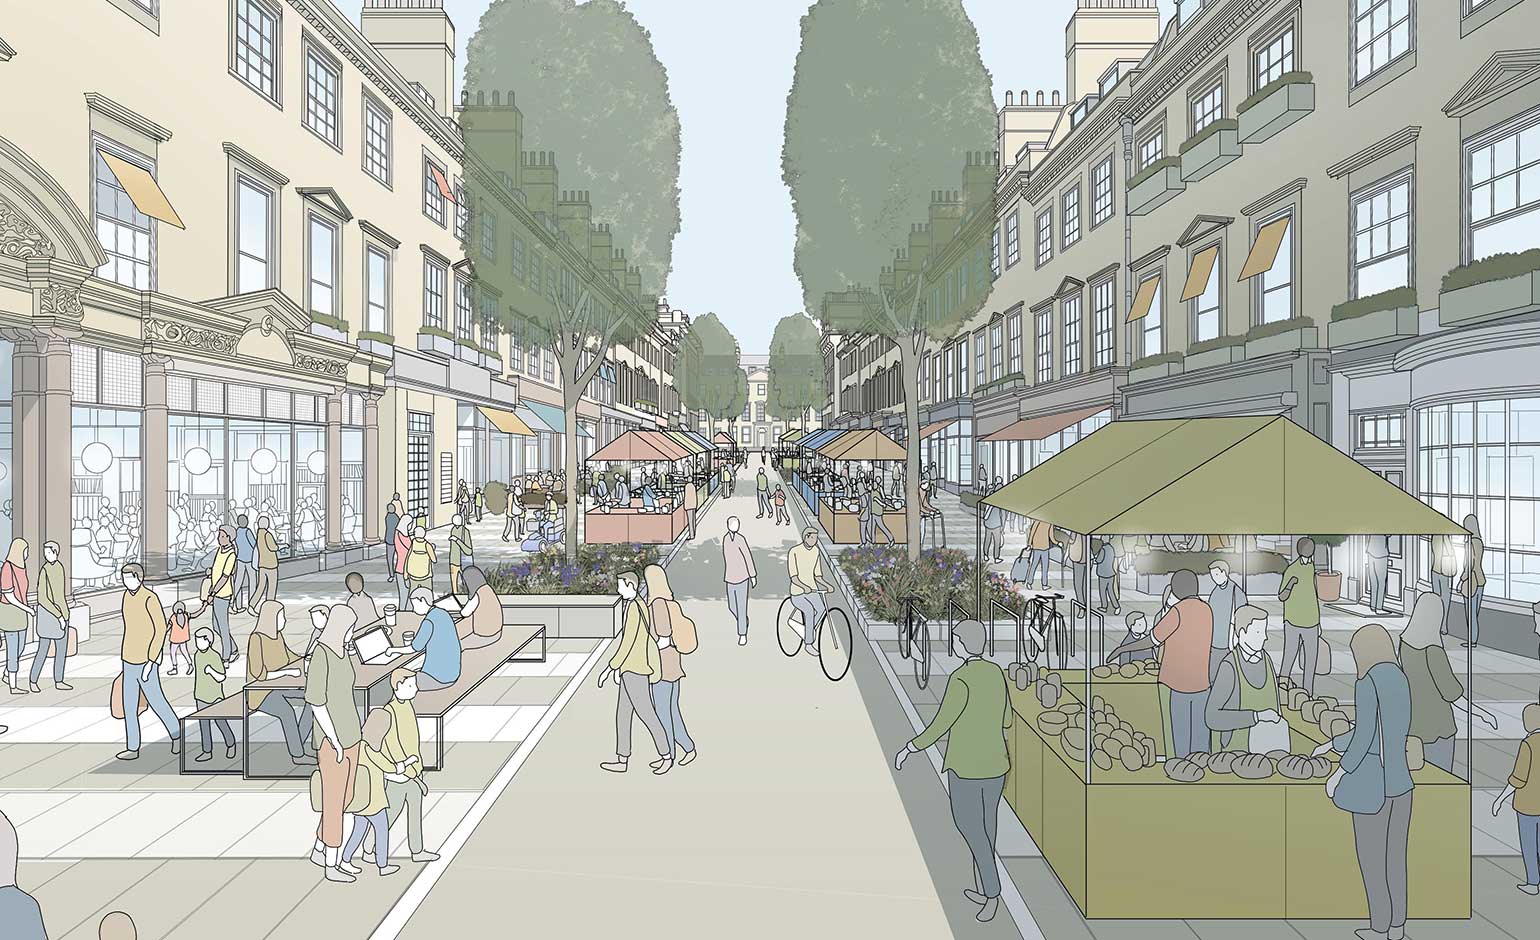 Drop-ins planned to find out latest plans for Milsom Quarter projects